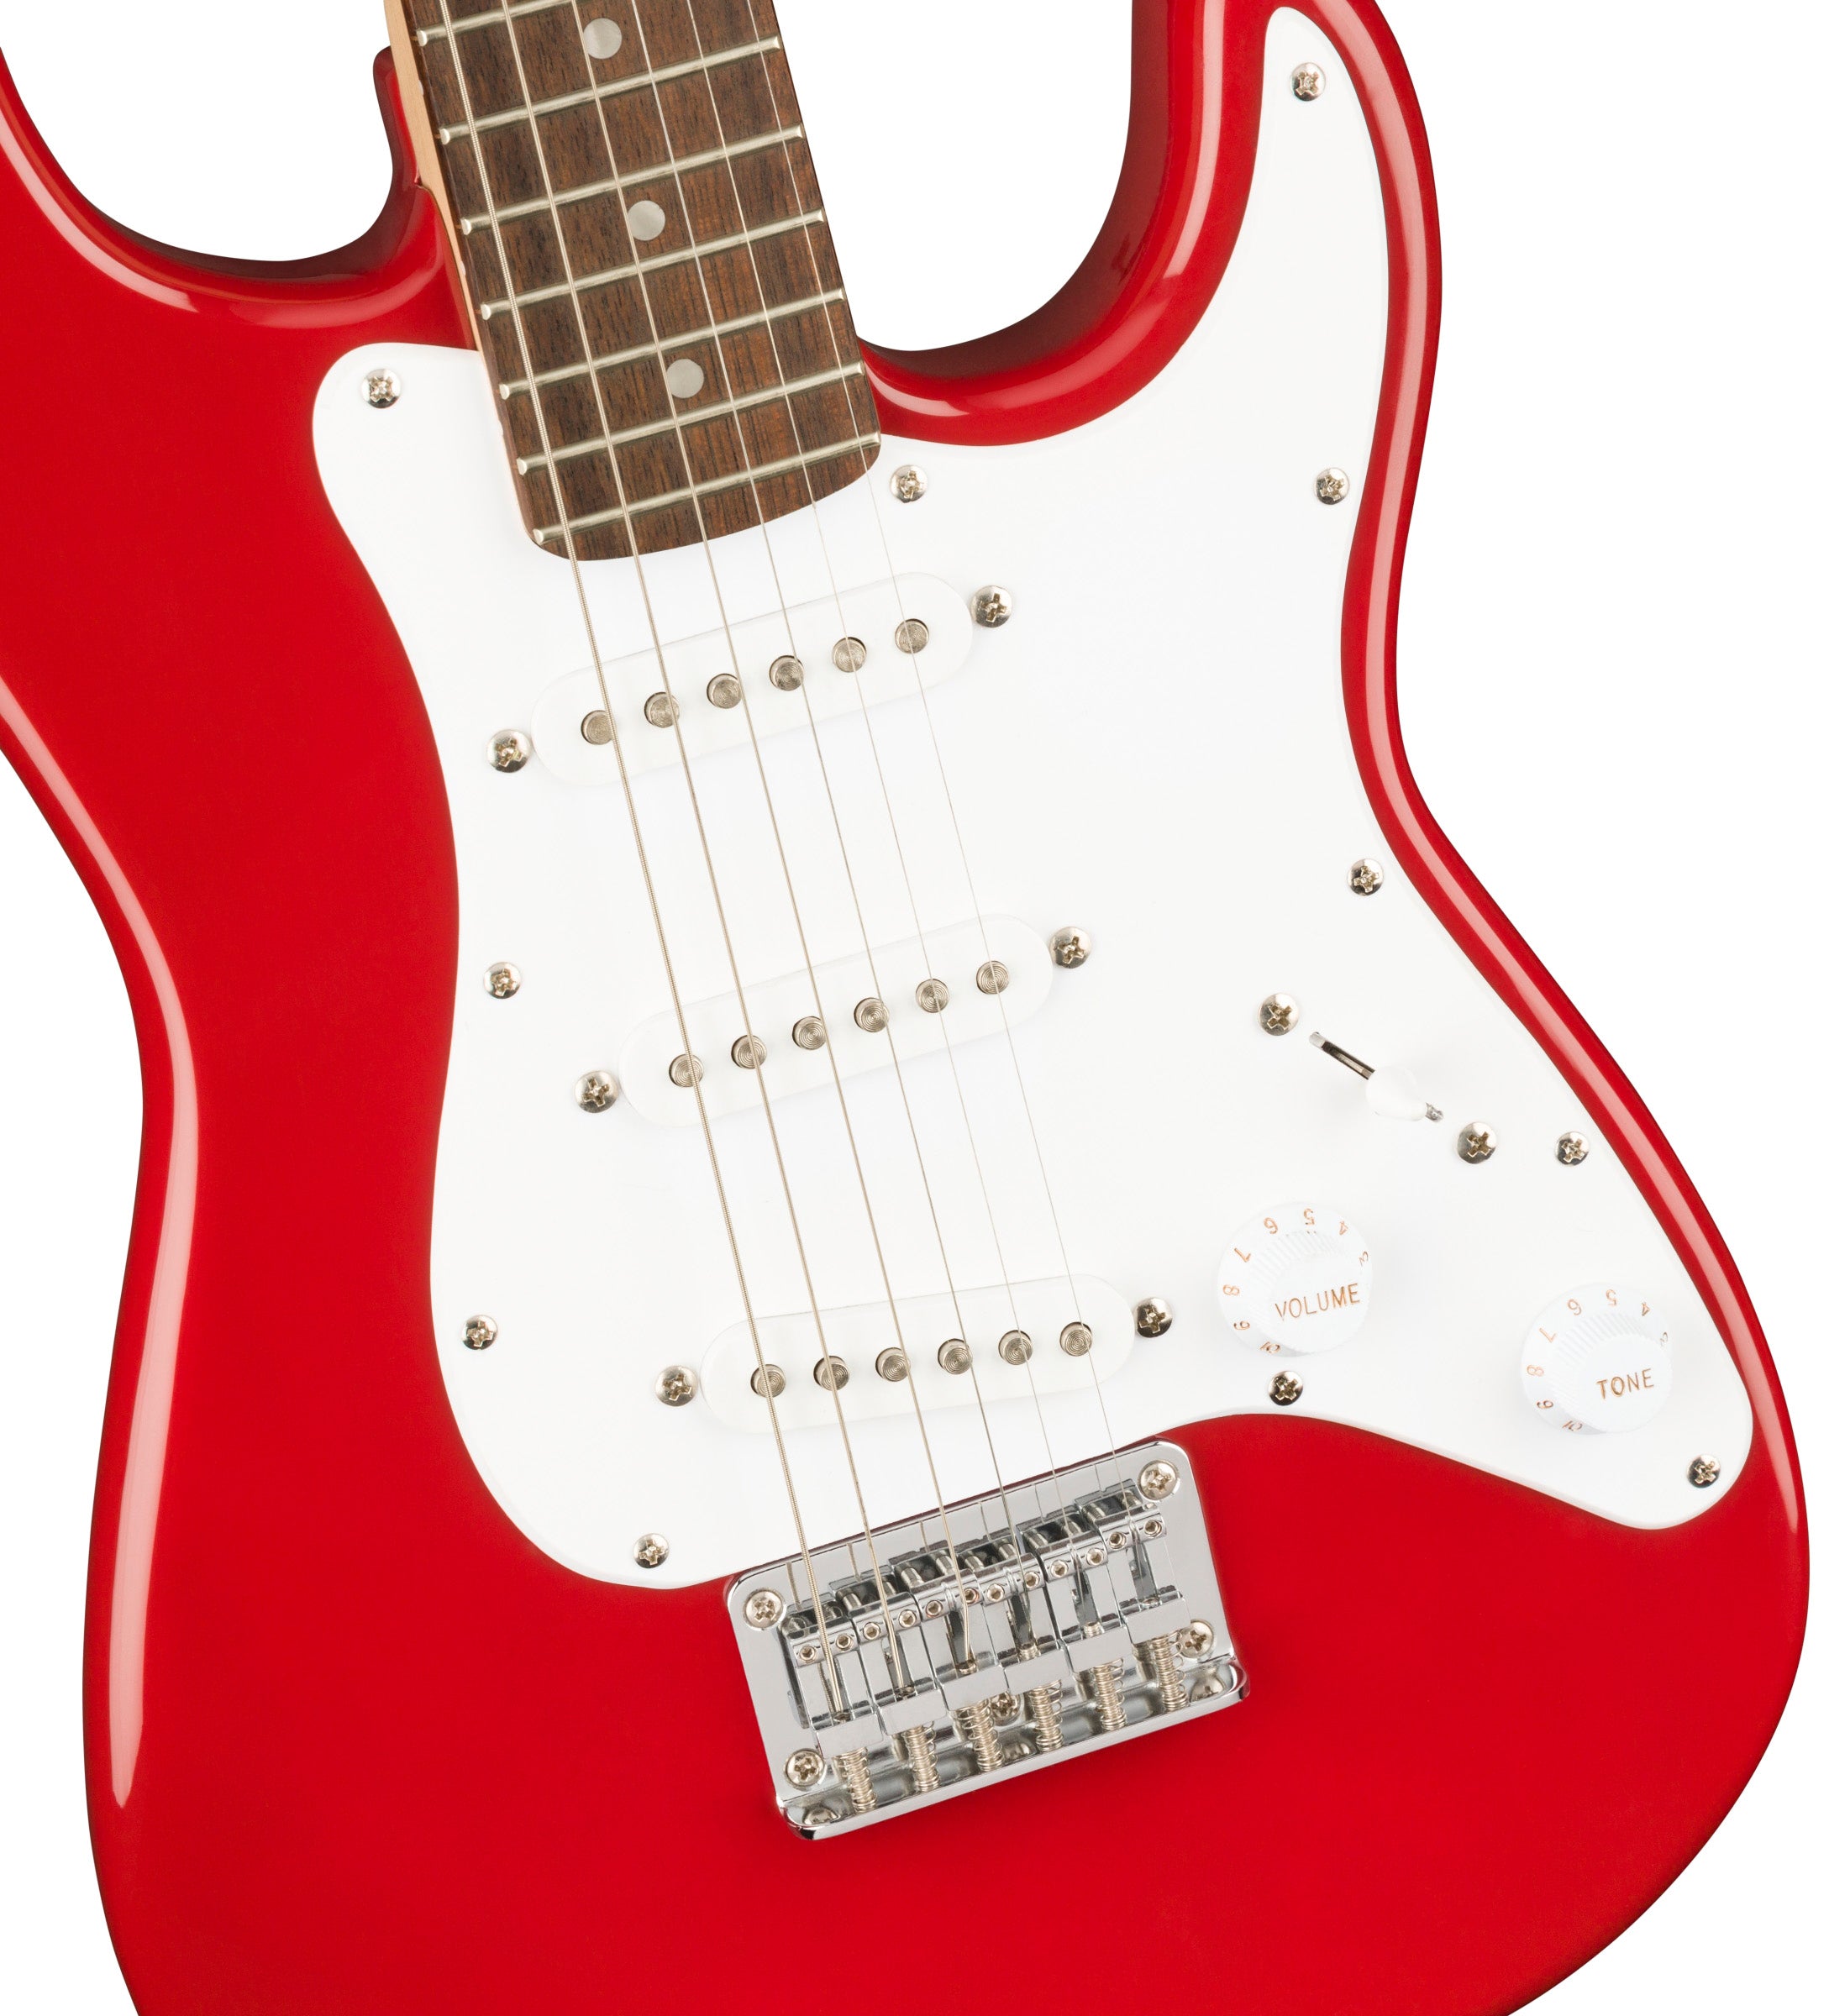 Squier by Fender Mini Stratocaster - 器材